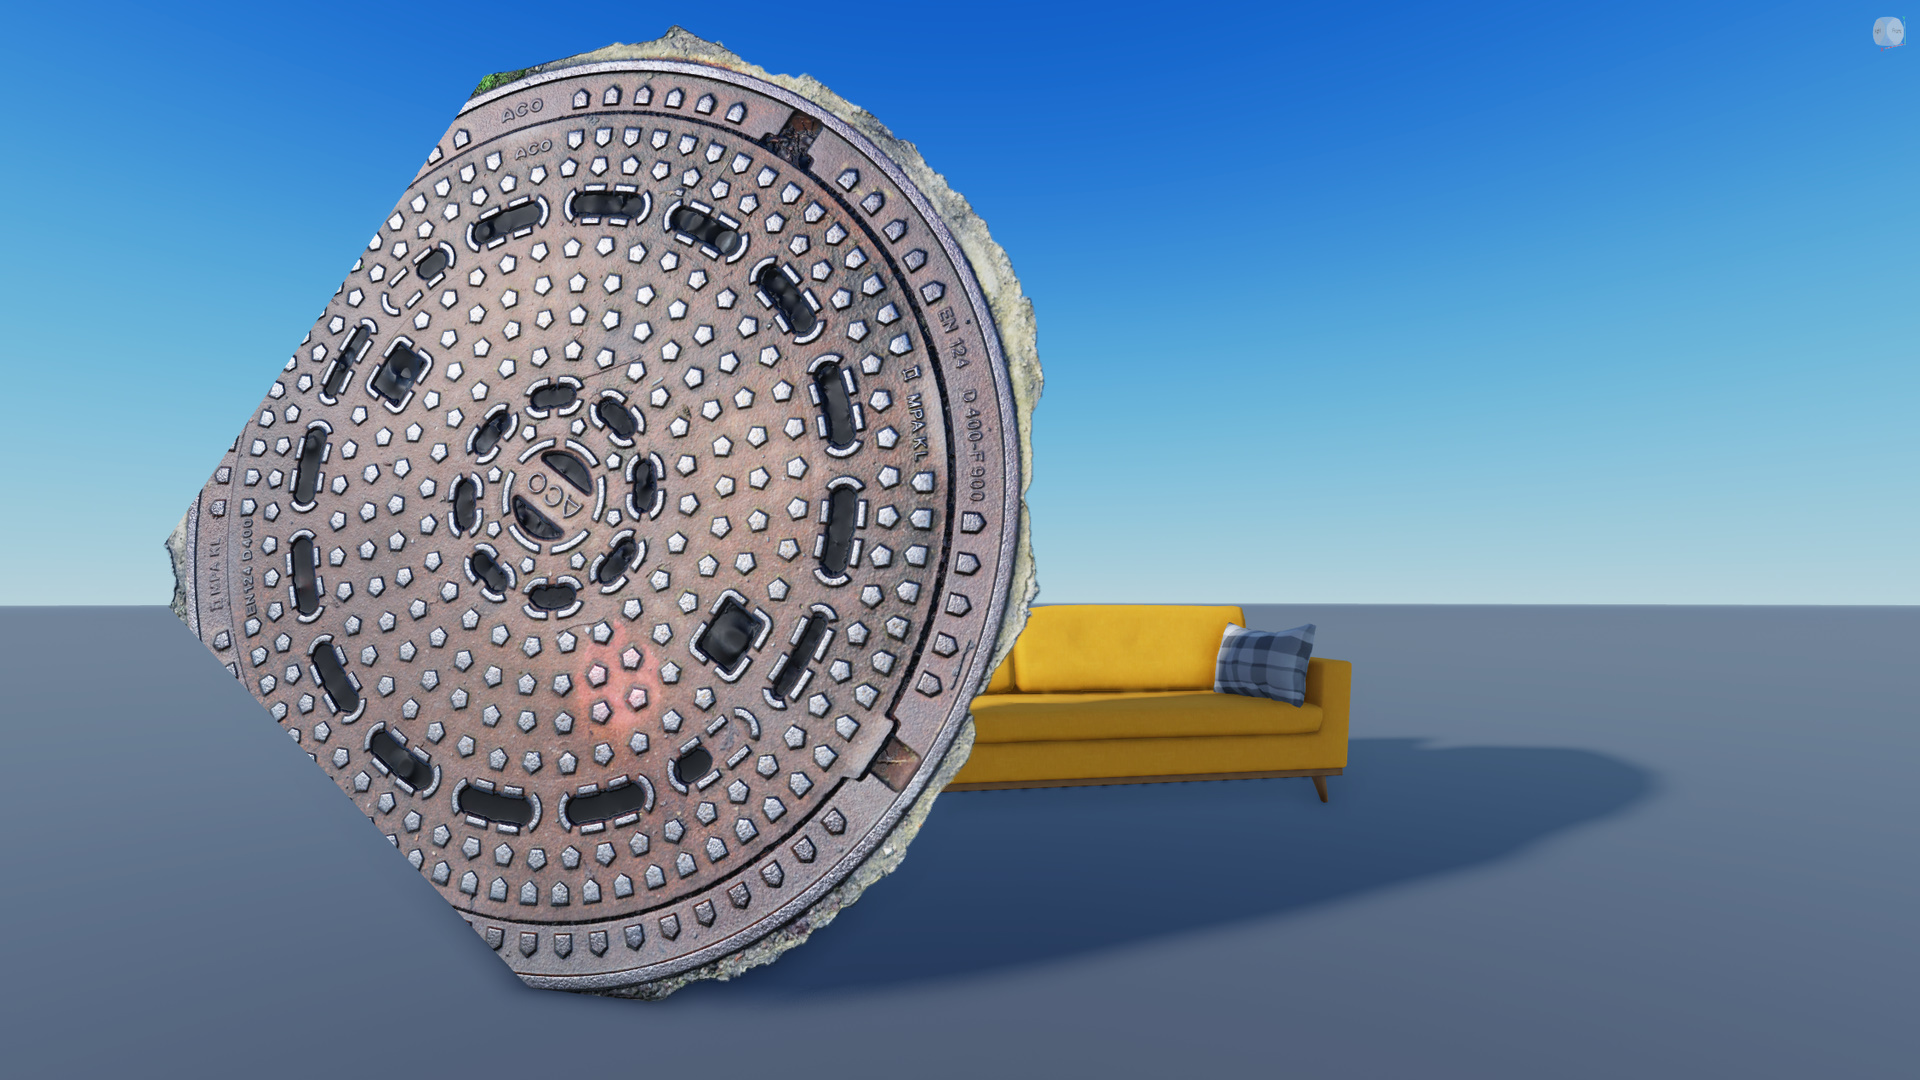 A manhole cover in front of a sofa. The manhole cover has rough edges defined by its texture.